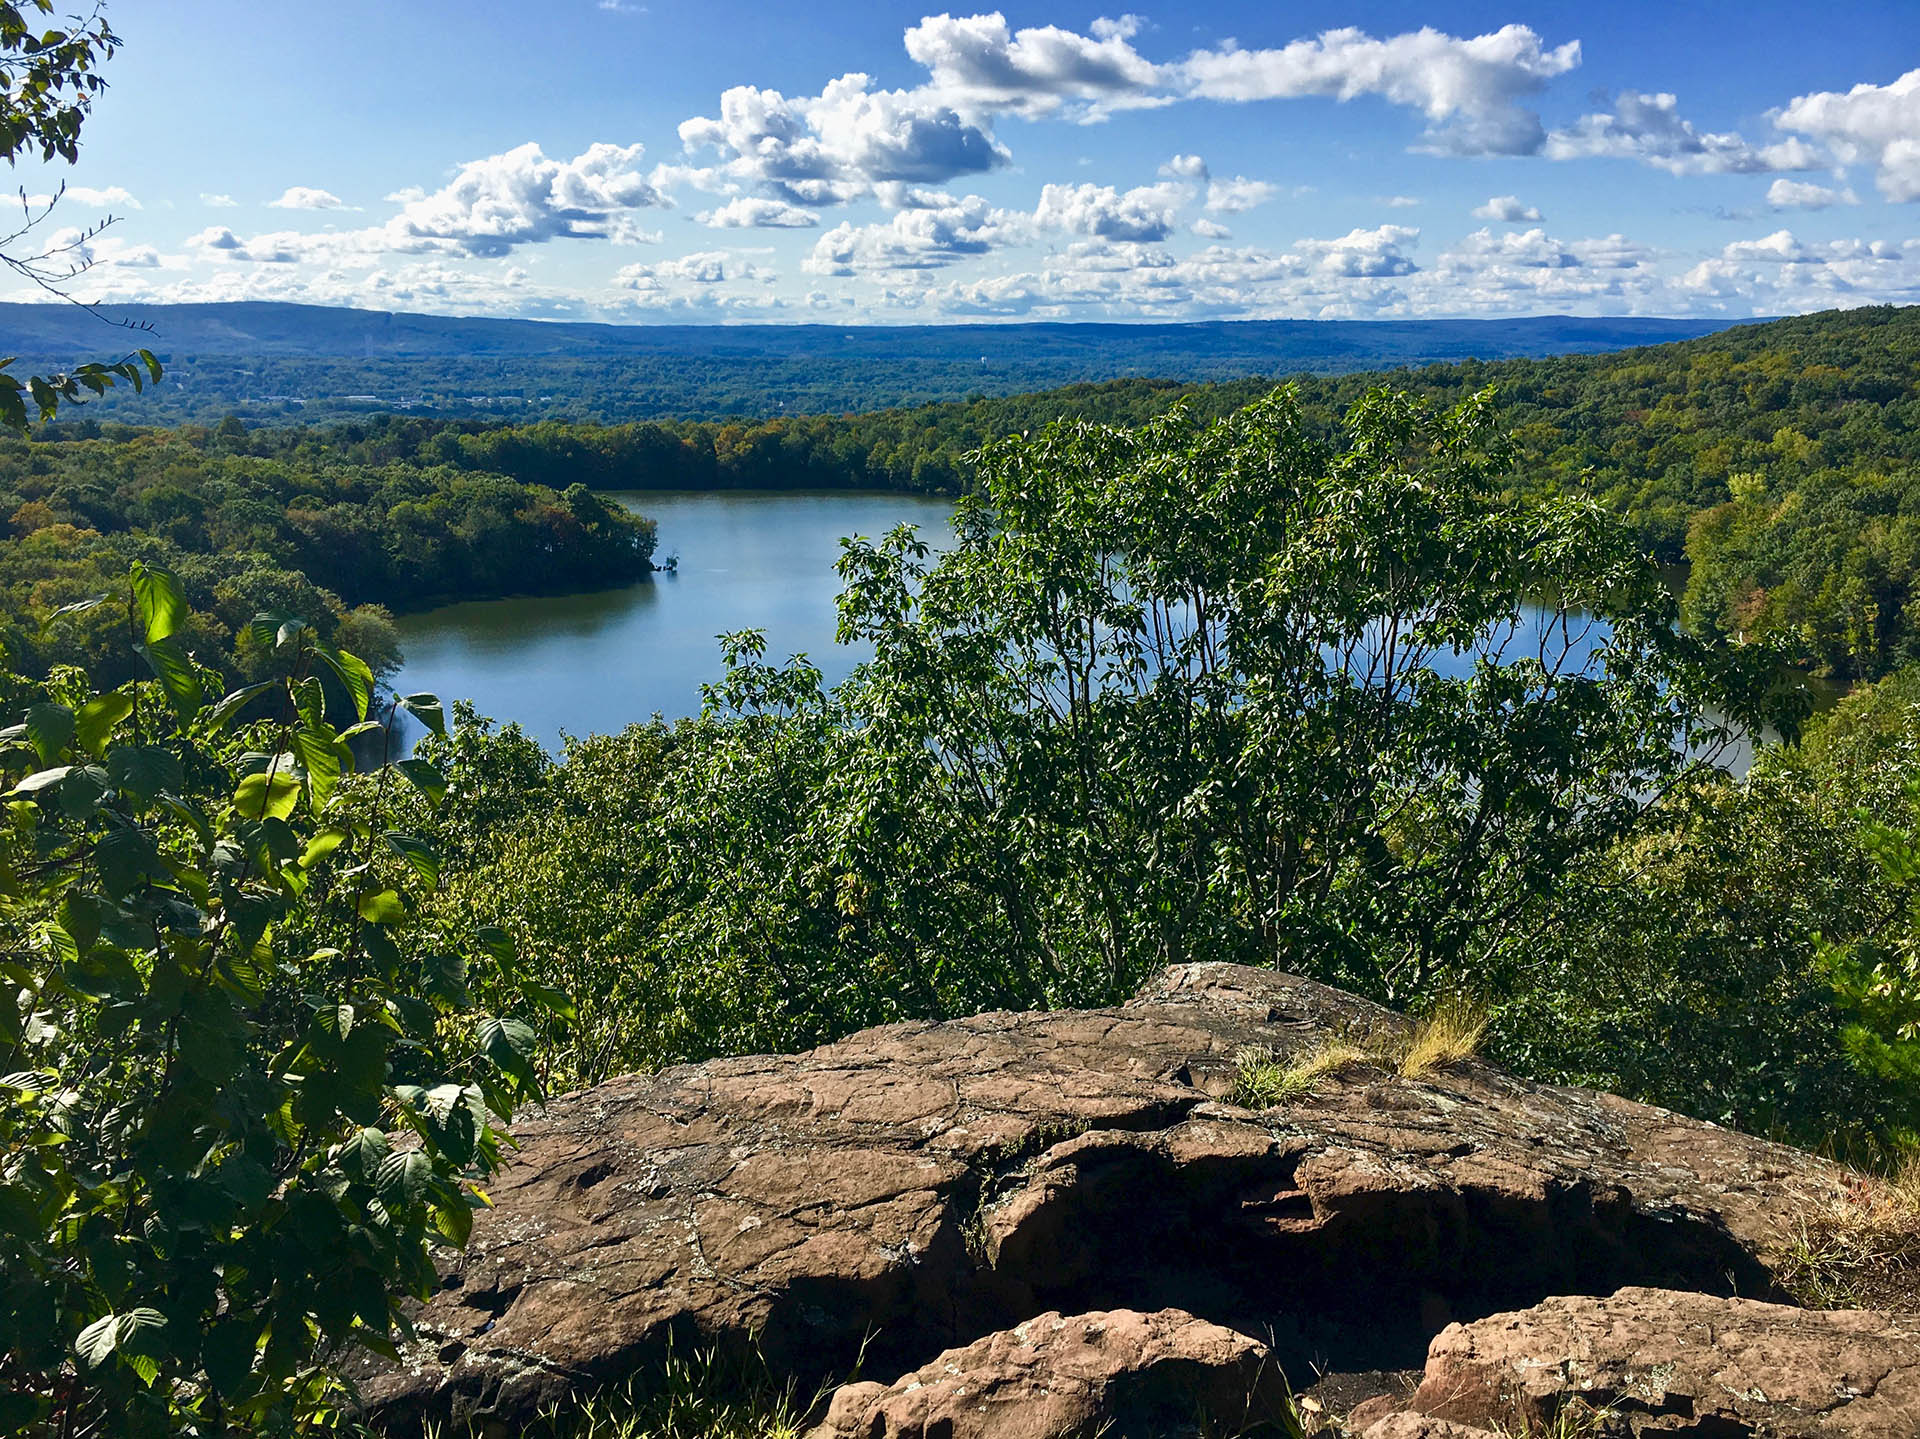 View of lake from top of rocky outcrop, taken by The Thousand-Miler.